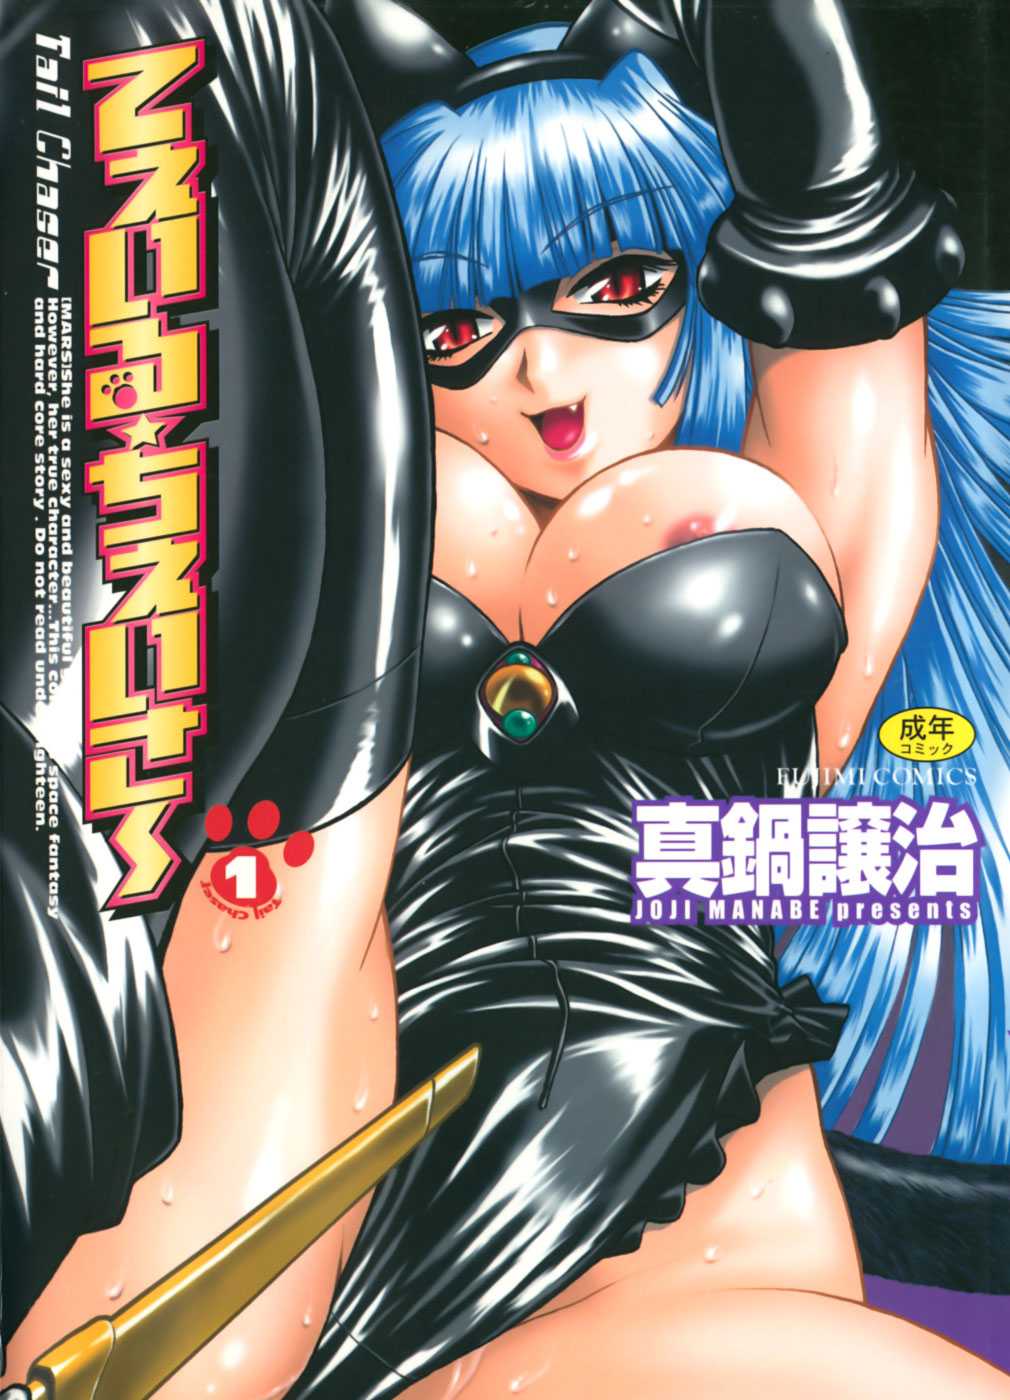 [Jouji Manabe] Tail Chaser Vol. 1 [ENG][Complete] 